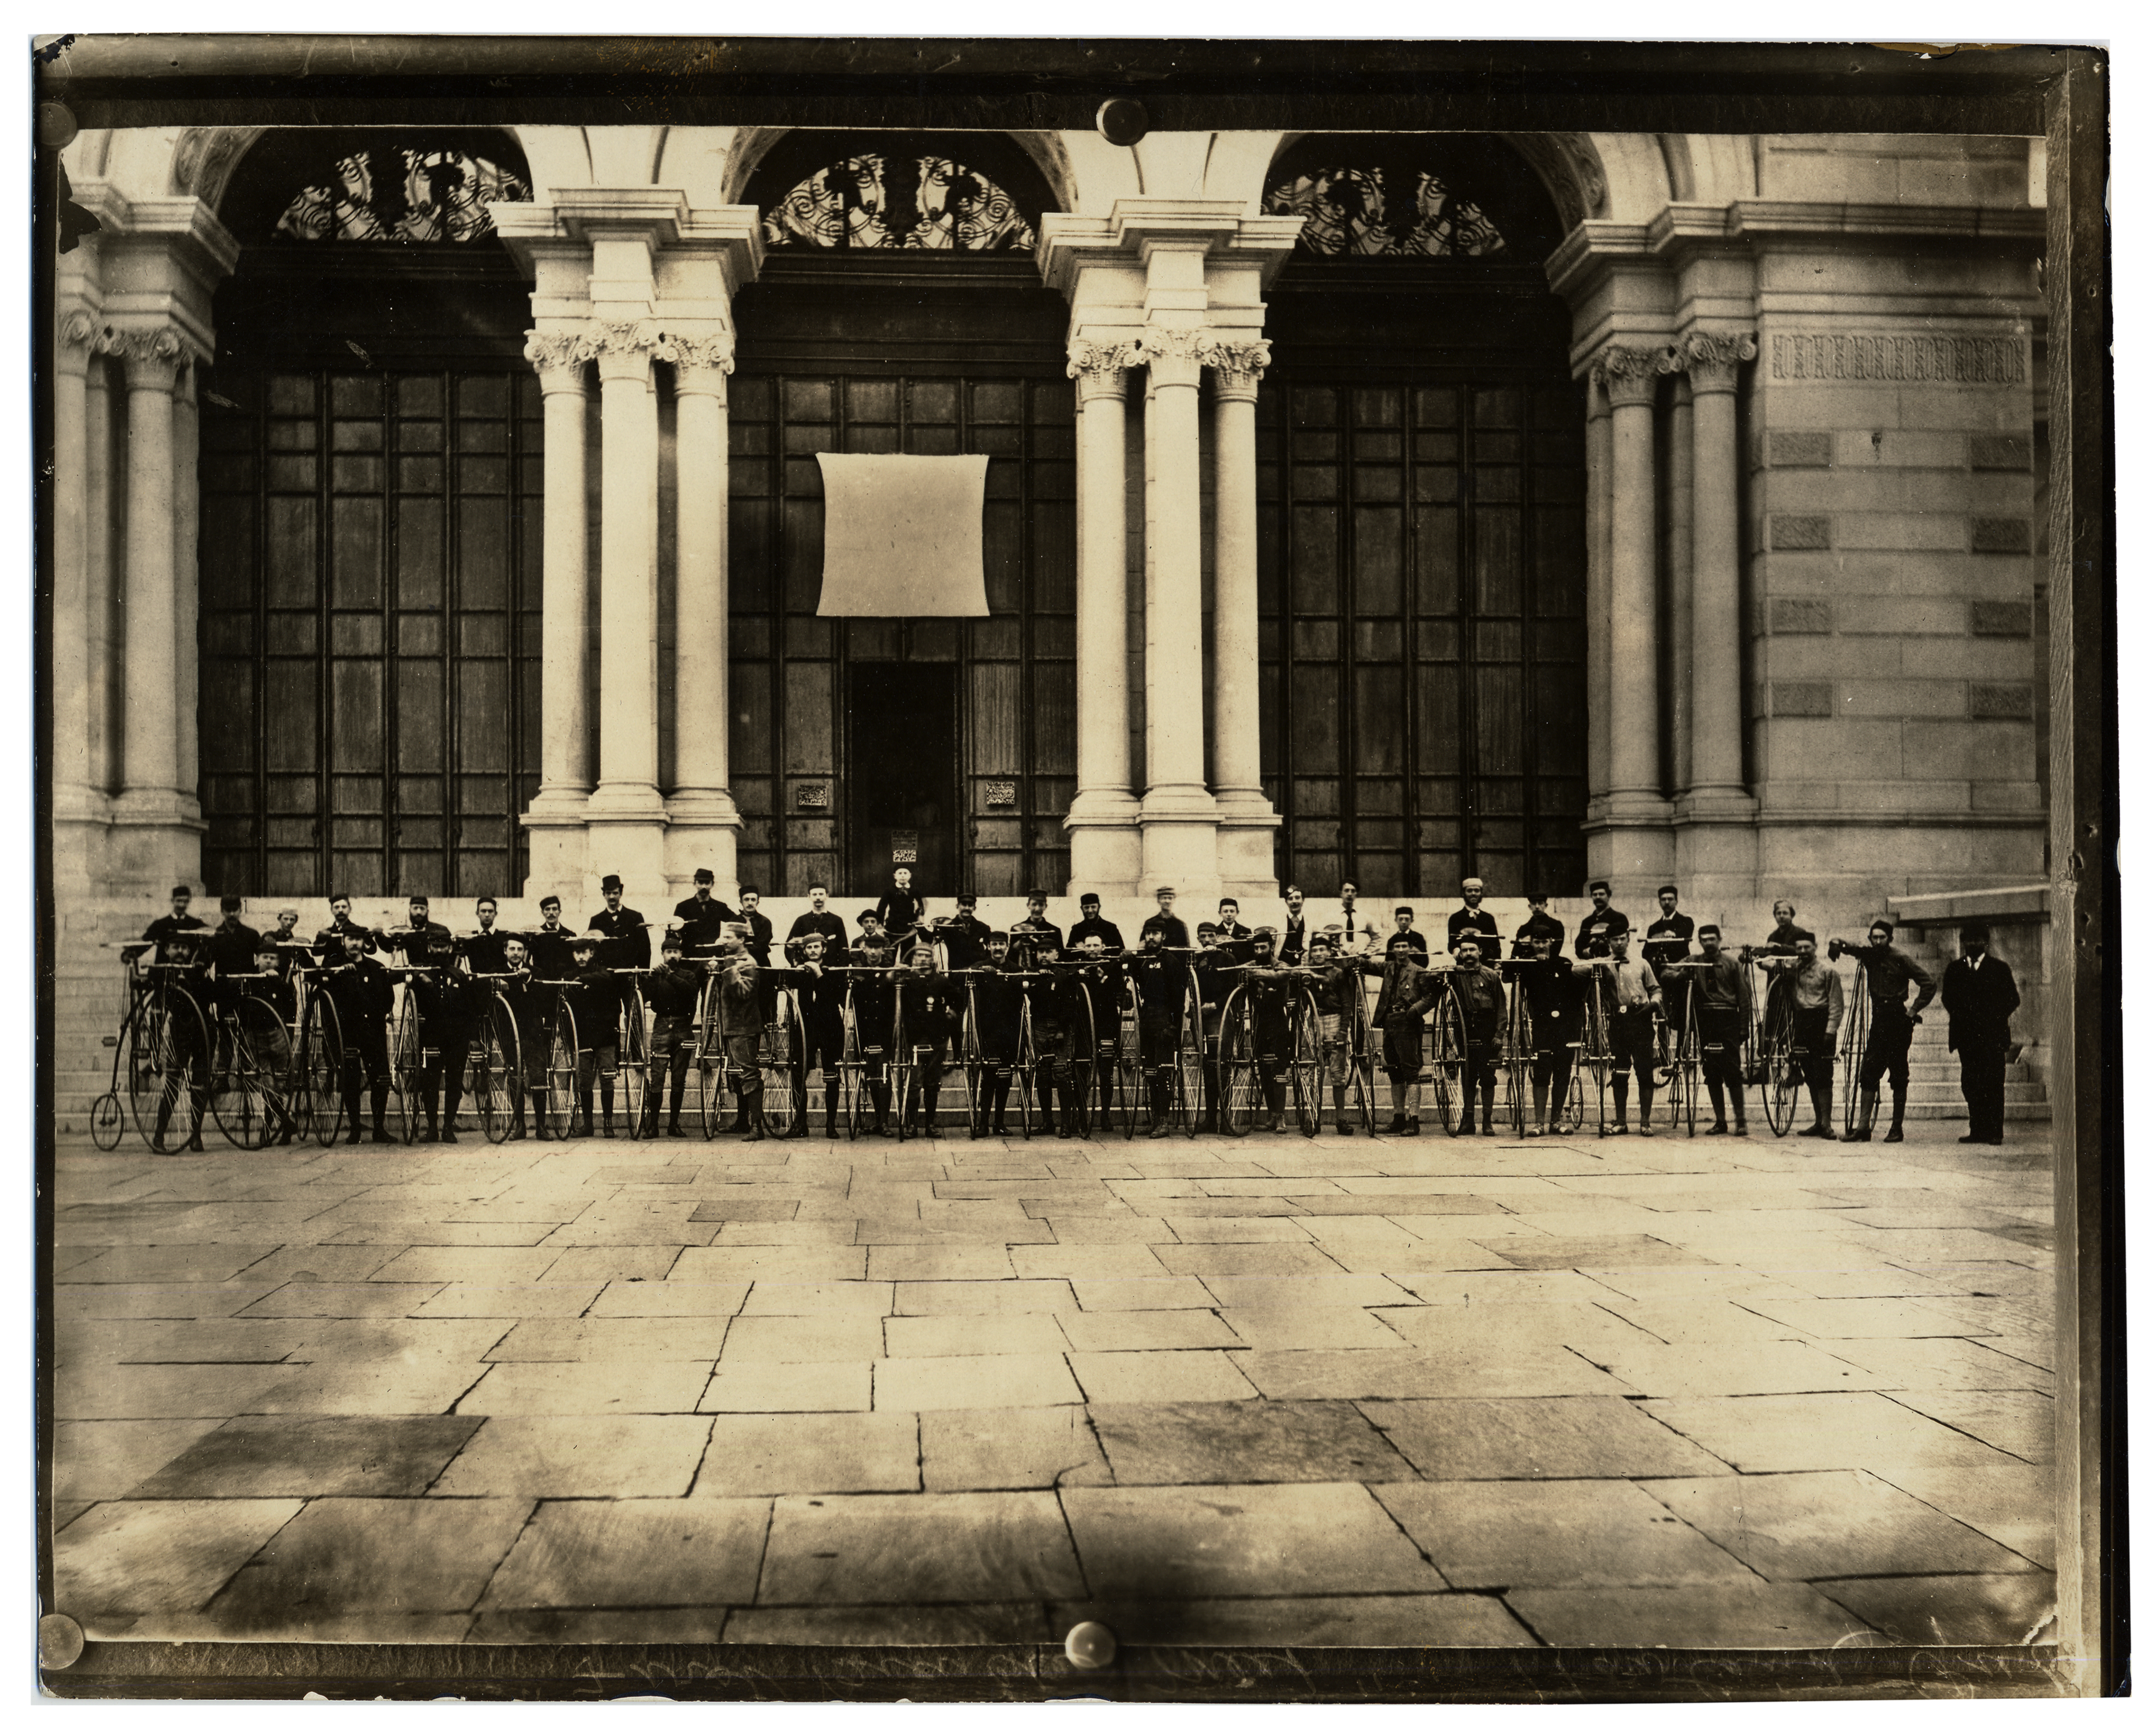 First bicyclist meet in front of Memorial Hall, Fairmount Park | Historical Society of Pennsylvania, Penrose Pictoral Philadelphia collection